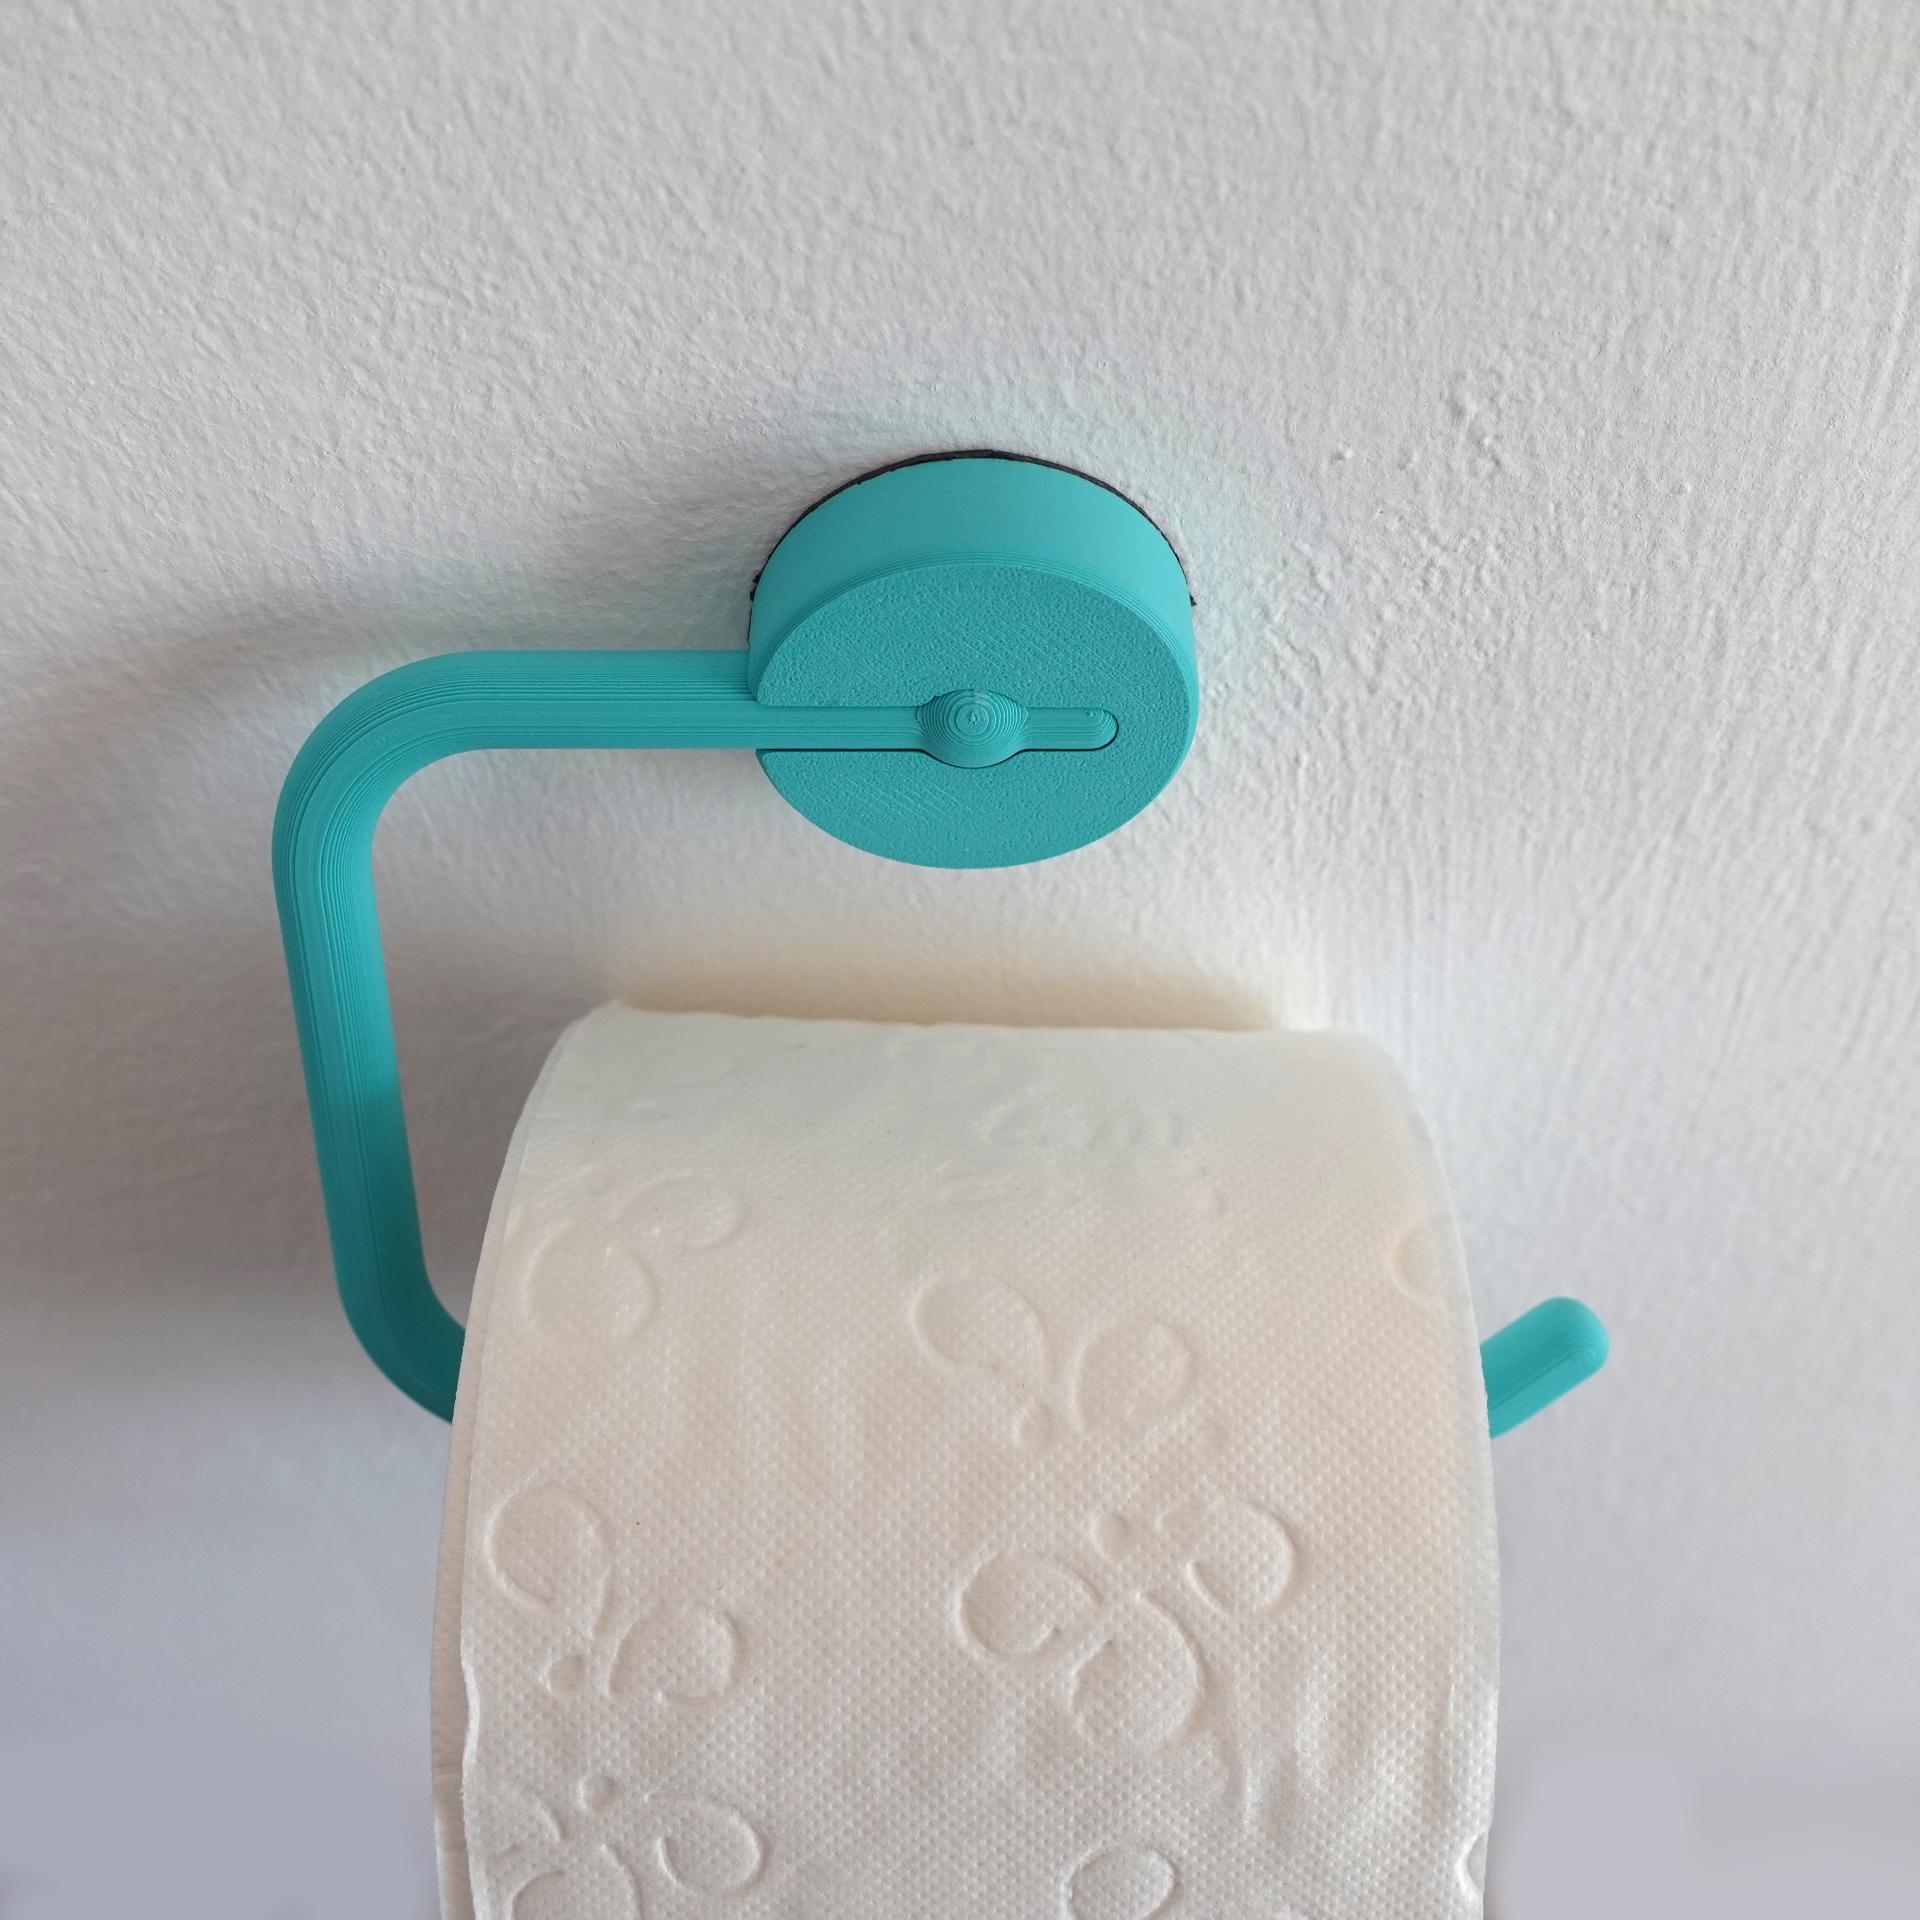 Toilet paper holder print-in-place 3d model